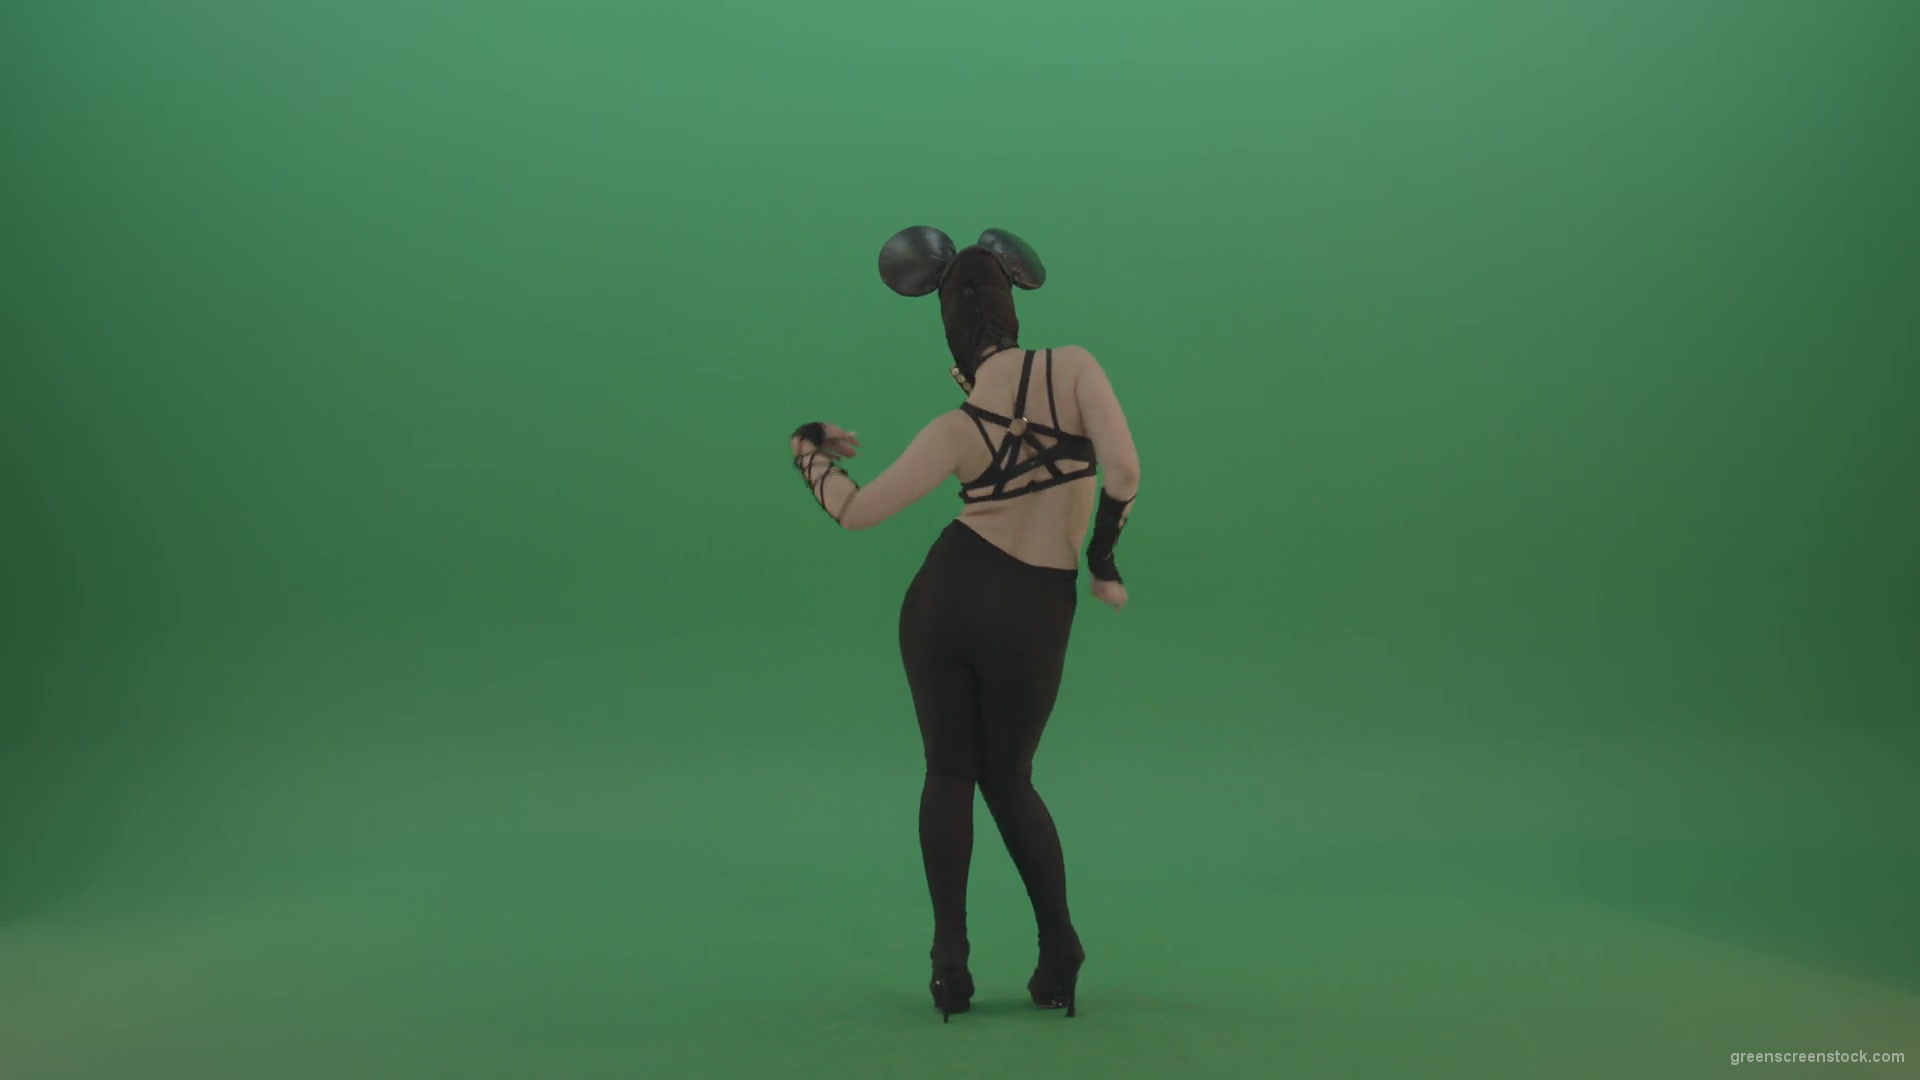 Girl-quickly-dances-in-the-style-of-Mickey-Mouse-on-the-sides-of-a-sexy-costume-on-green-screen-1920_008 Green Screen Stock